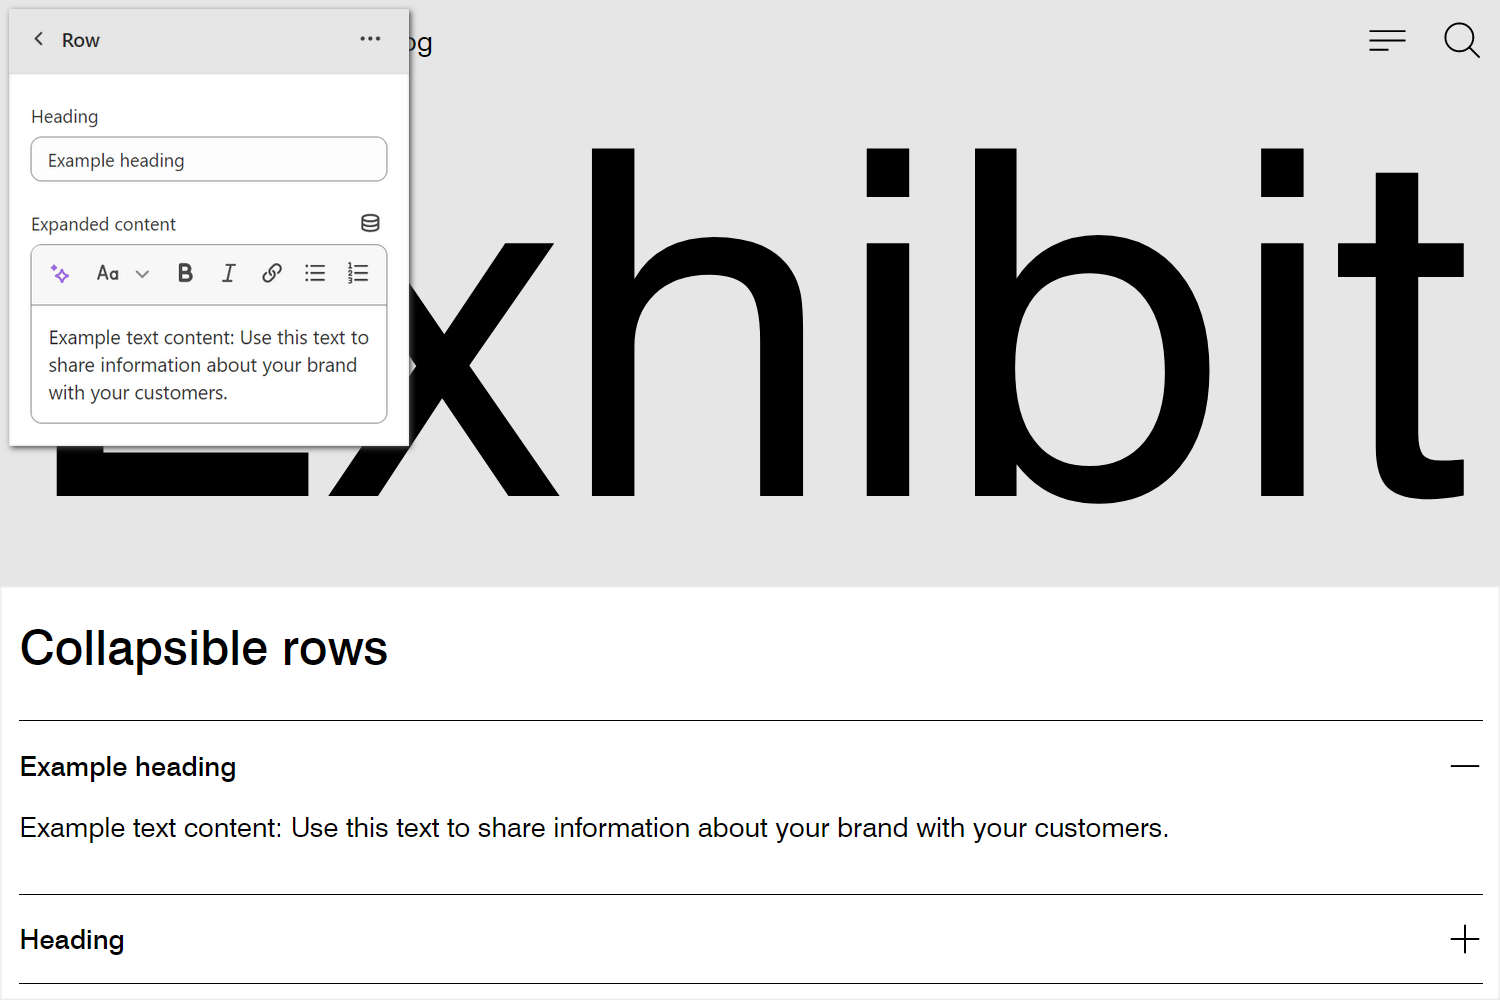 An example Collapsible rows section on a store's Homepage.